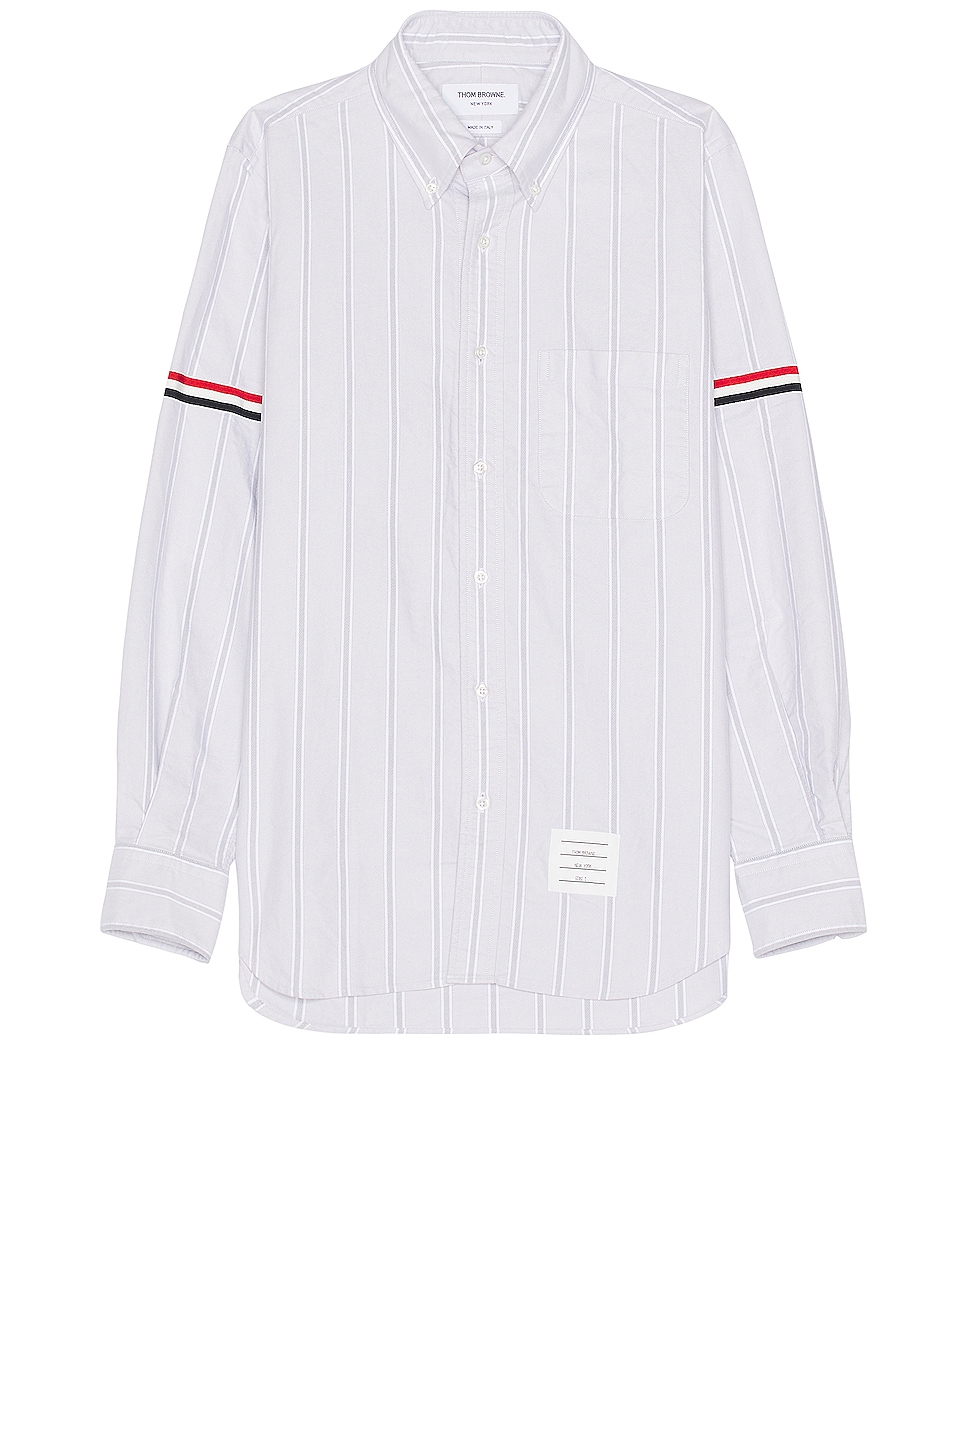 Image 1 of Thom Browne Straight Fit Long Sleeve Shirt in Medium Grey